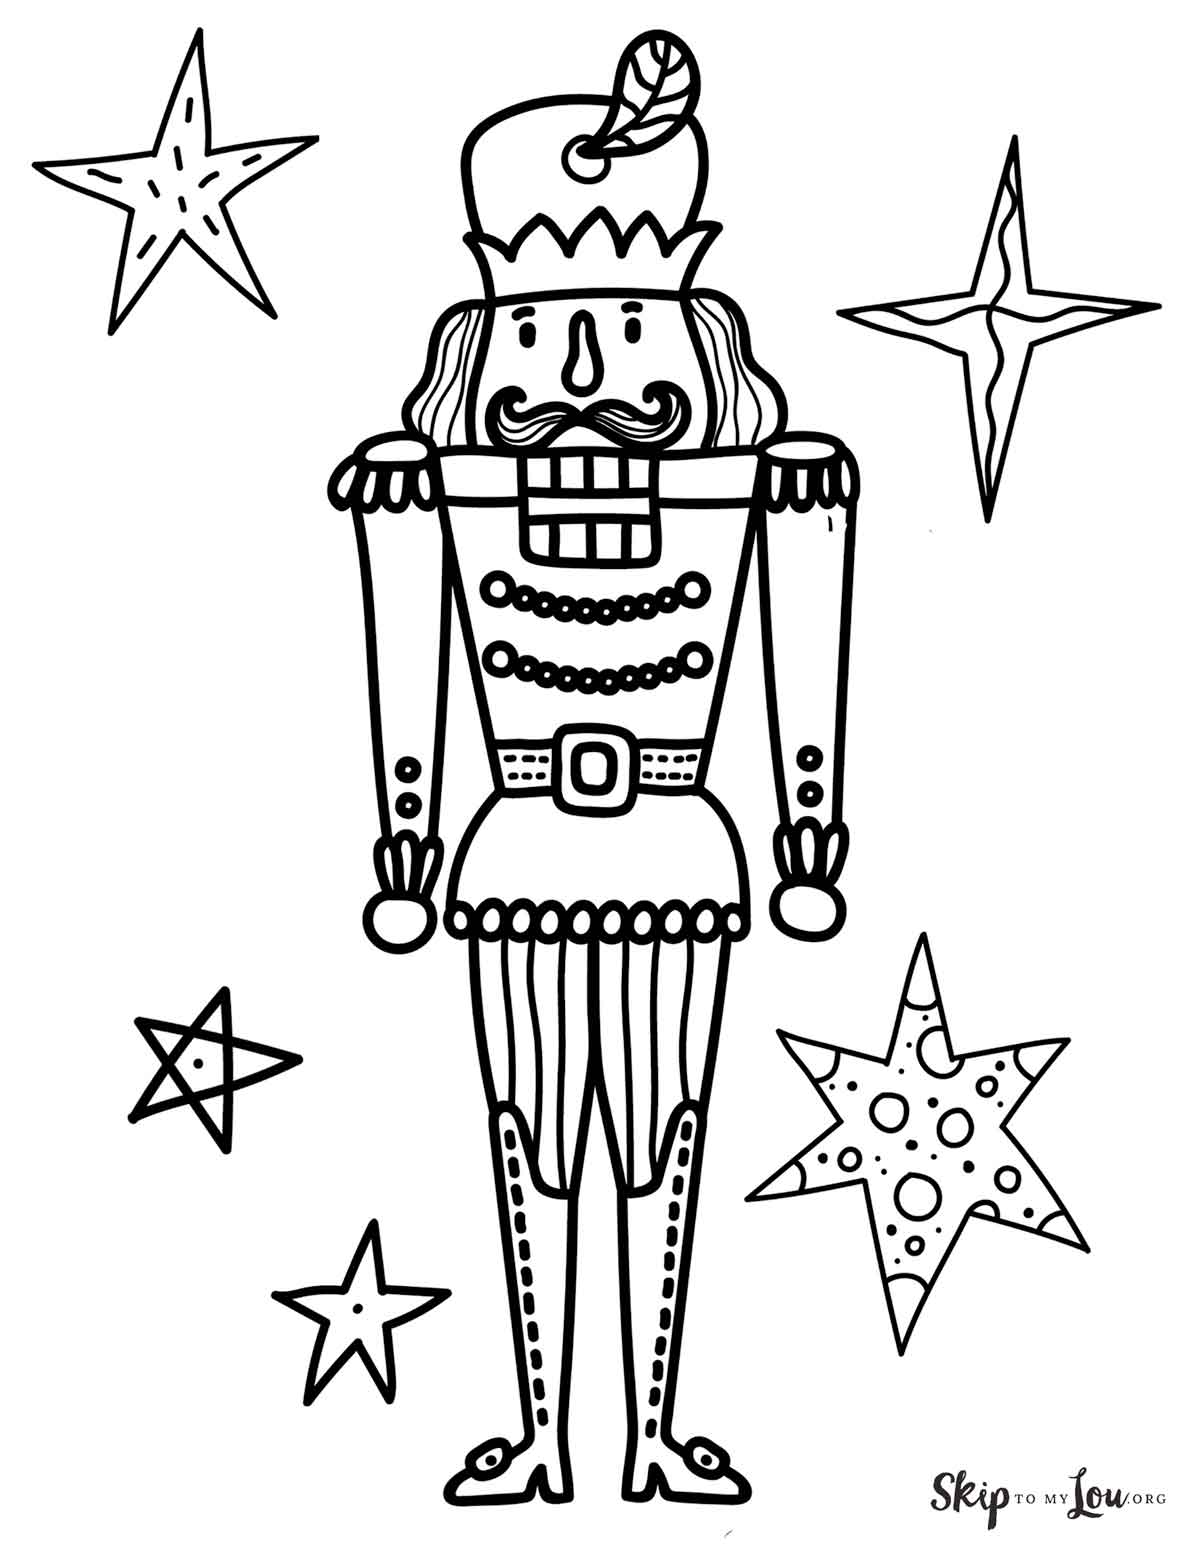 Nutcracker coloring pages skip to my lou